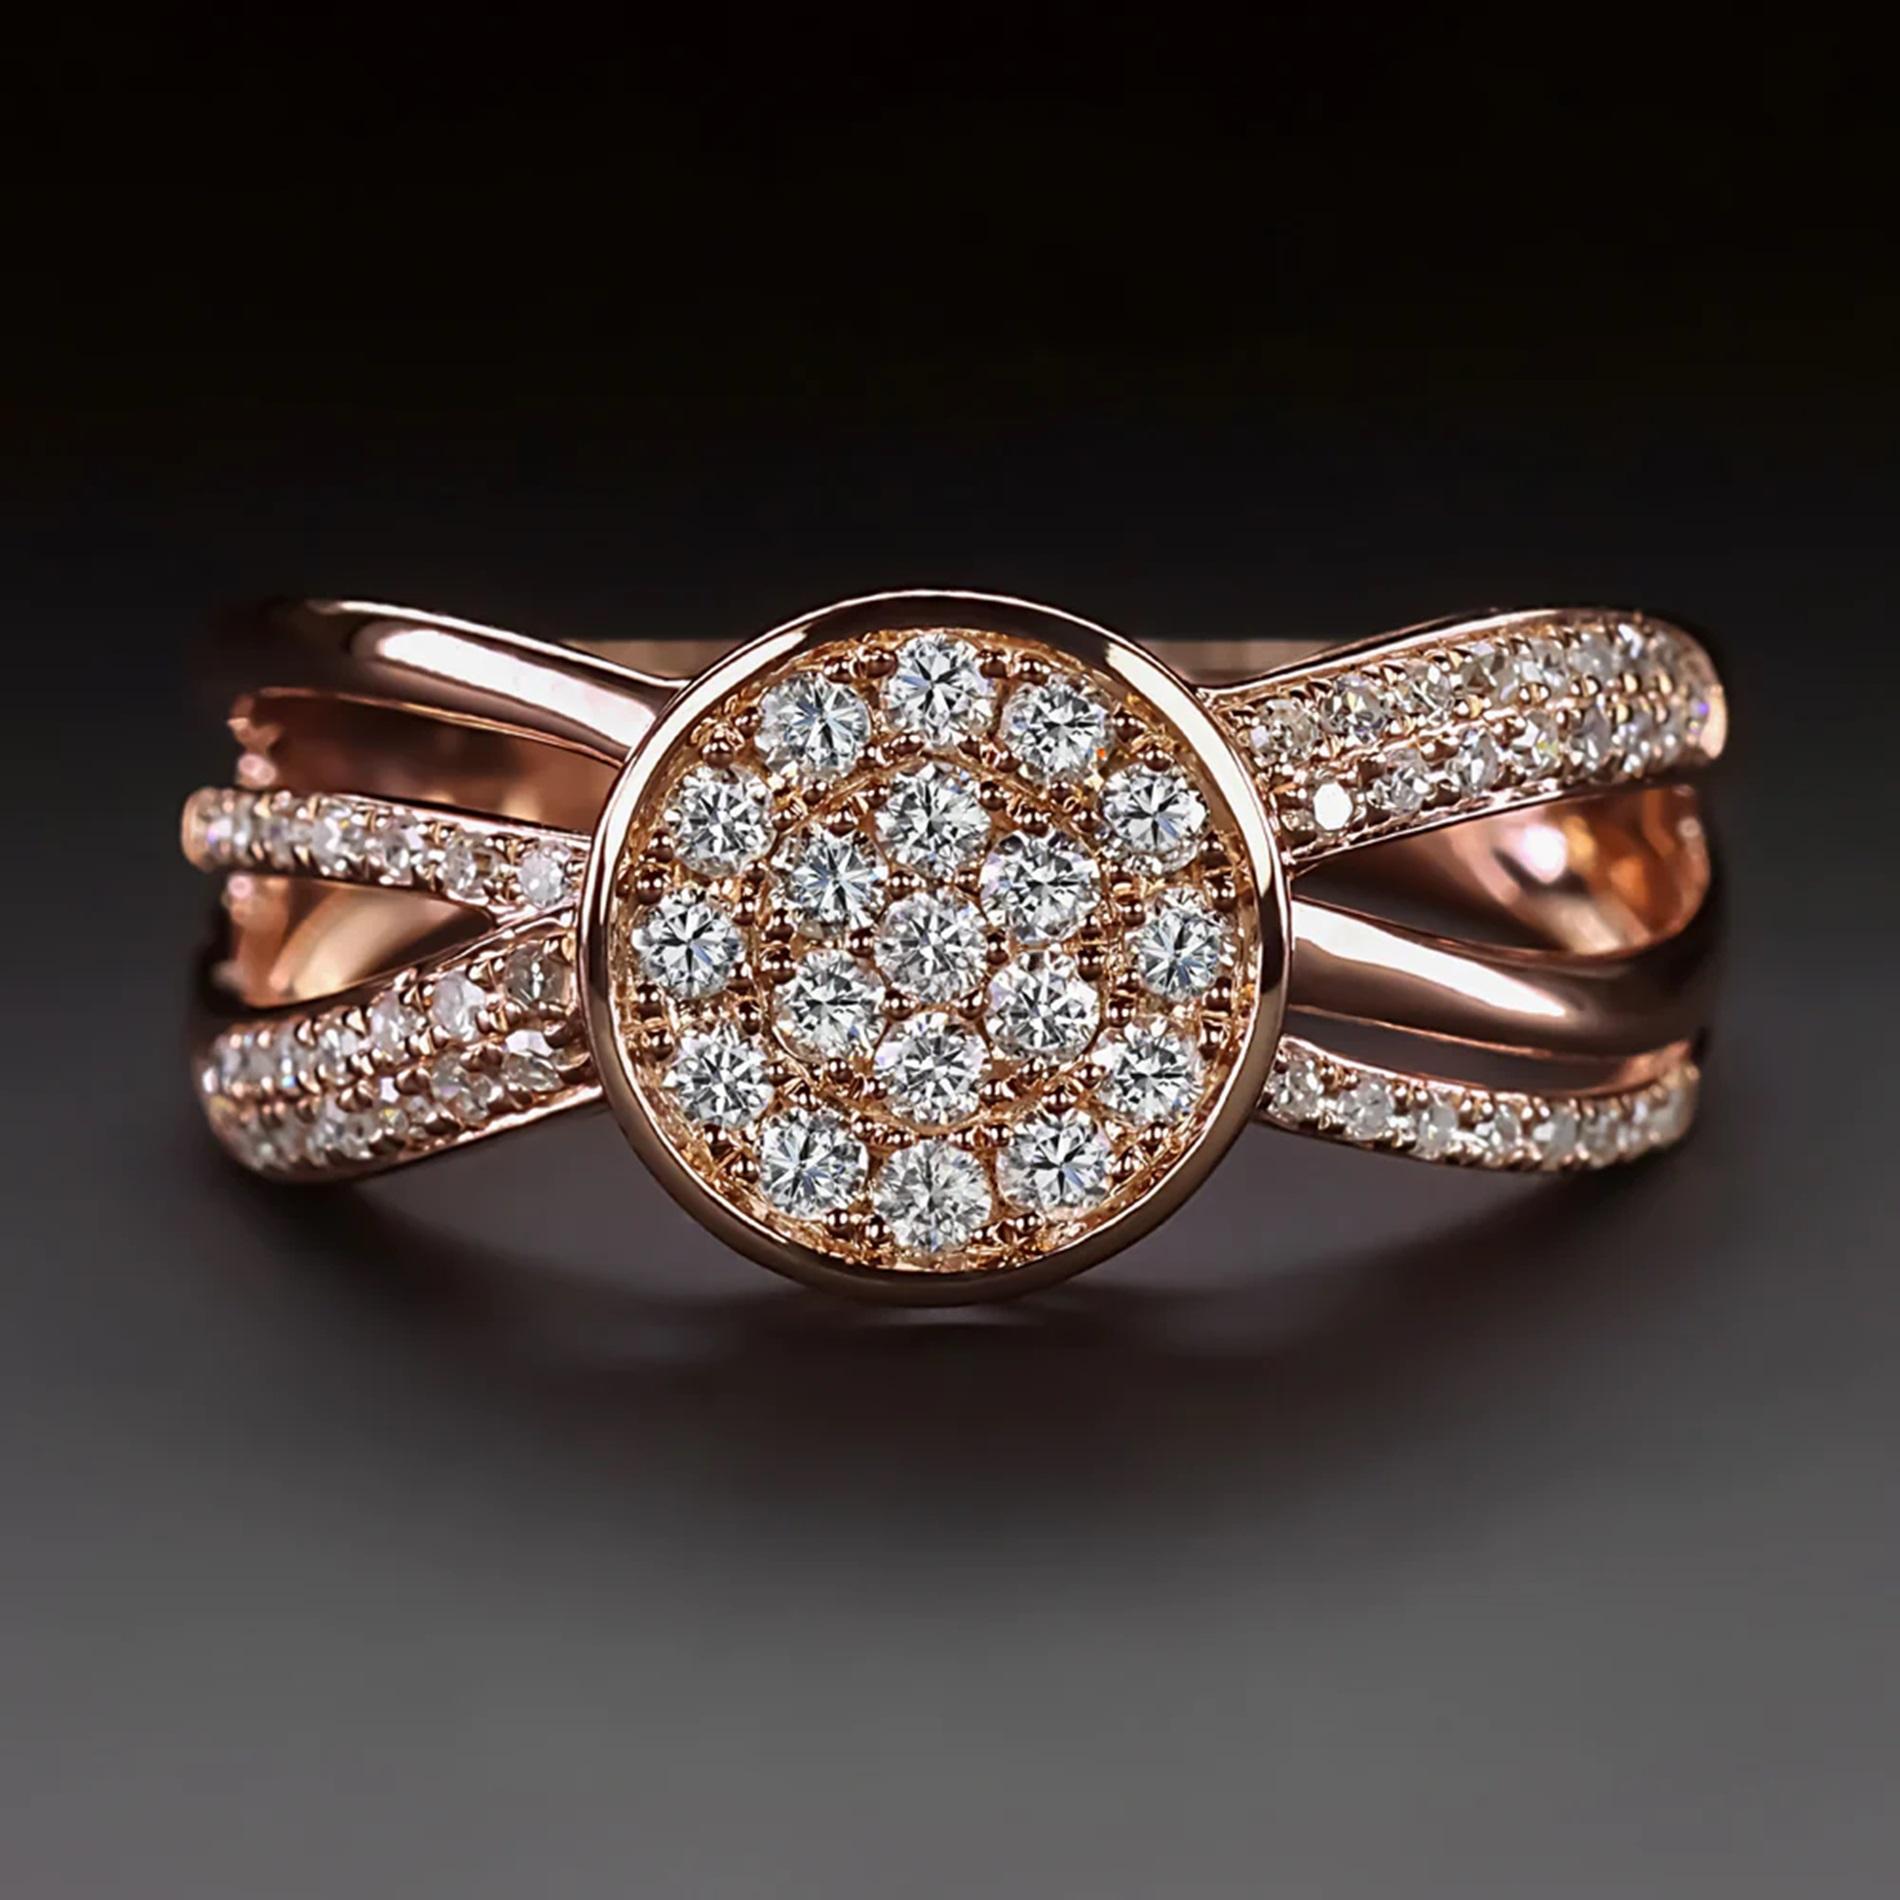 vintage designer ring bears the EFFY hallmark and is luxuriously designed with an eye catching pave diamond center and a criss crossing split shank design! Between the glittering diamonds and substantial 14k rose gold setting, this ring has an air